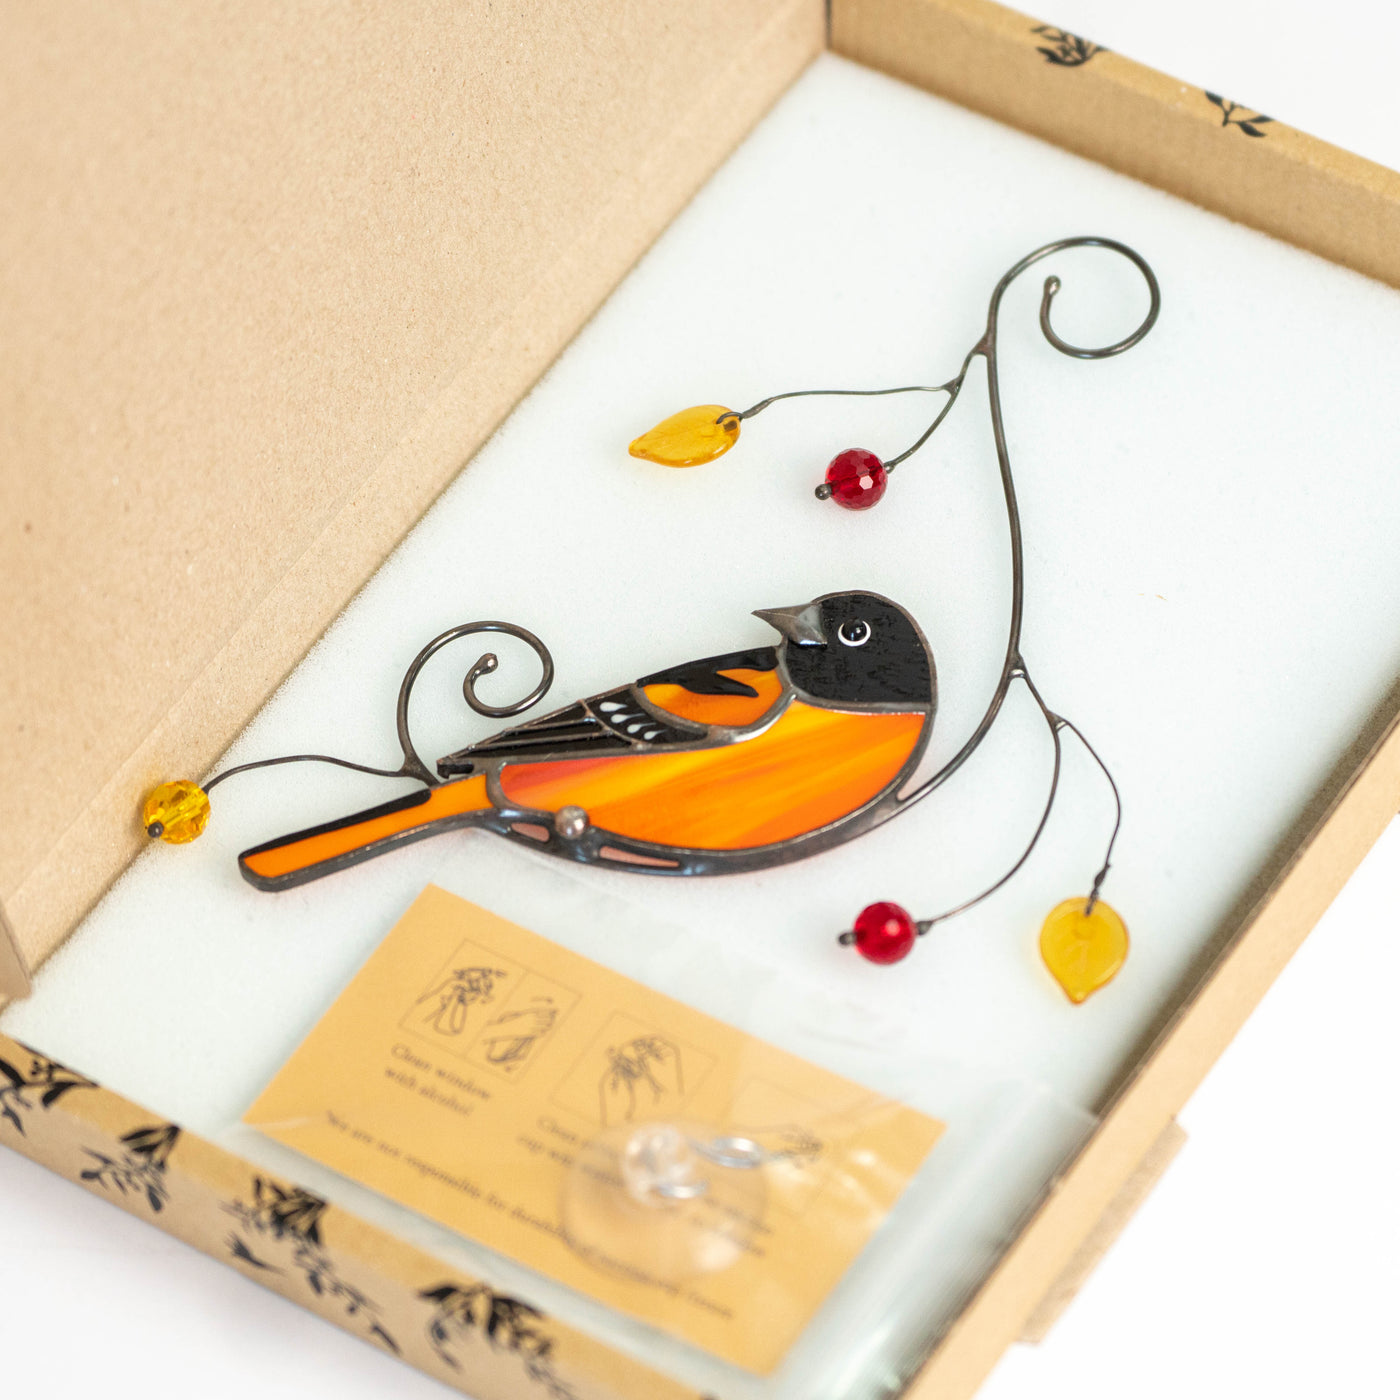 Stained glass looking left Baltimore oriole suncatcher in a brand box